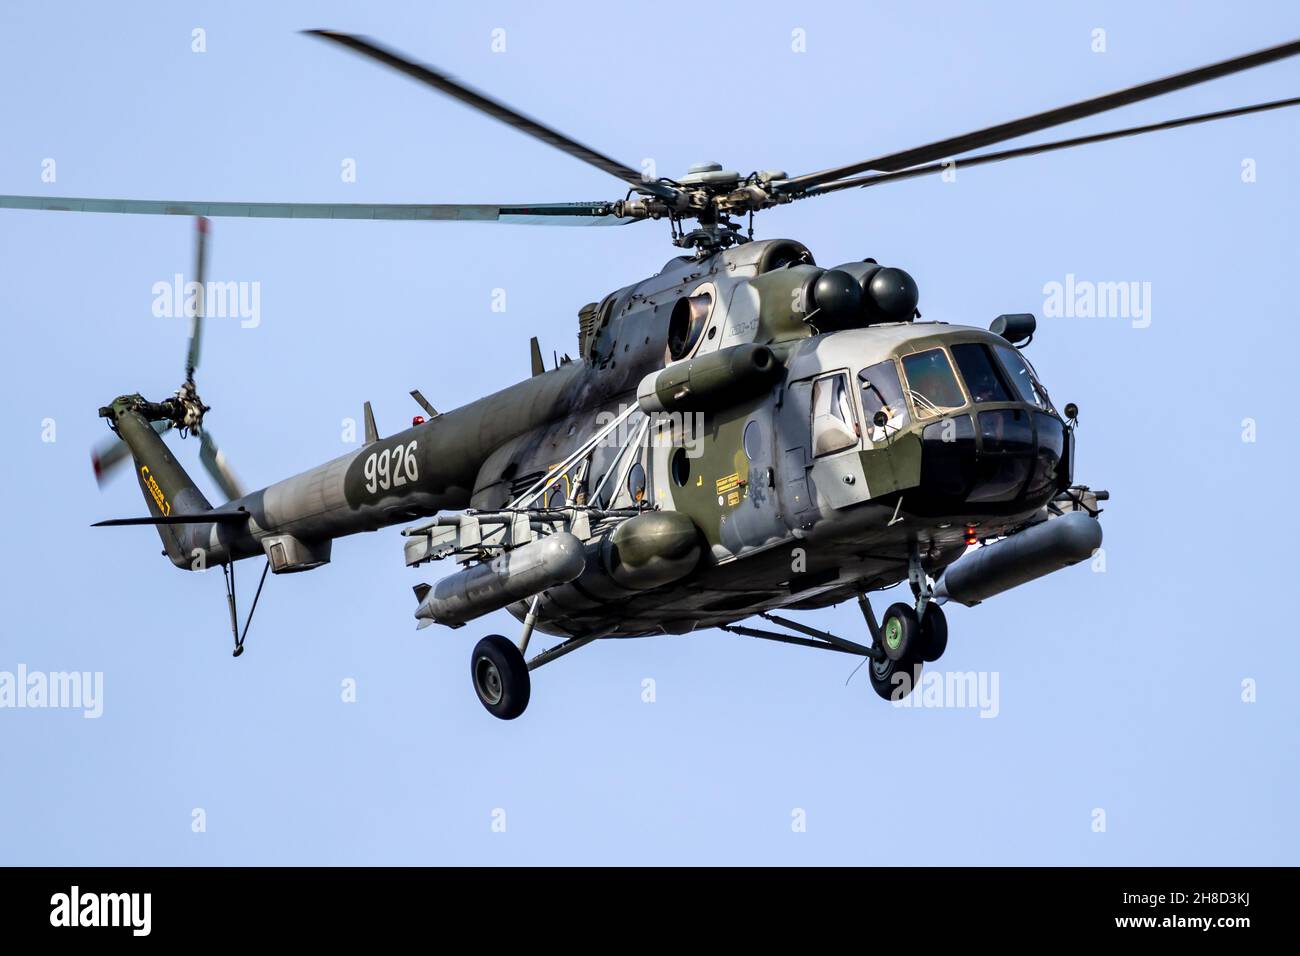 Czech Republic Air Force Mil Mi-171Sh transport and attack helicopter in flight over Kleine-Brogel Air Base, Belgium - September 13, 2021 Stock Photo